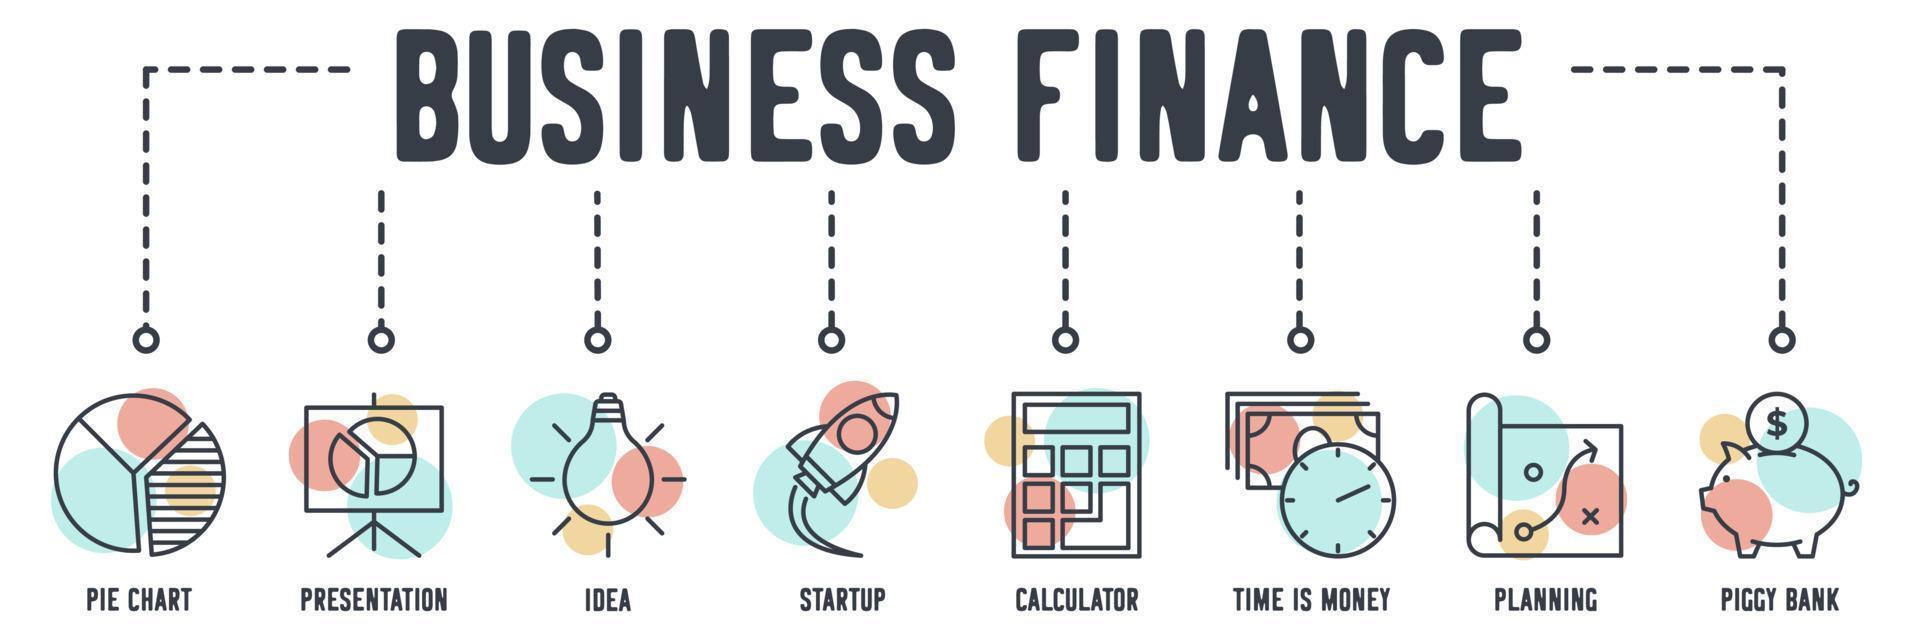 Business And Finance banner web icon. pie chart, presentation, idea, startup, calculator, time is money, planning, piggy bank vector illustration concept.